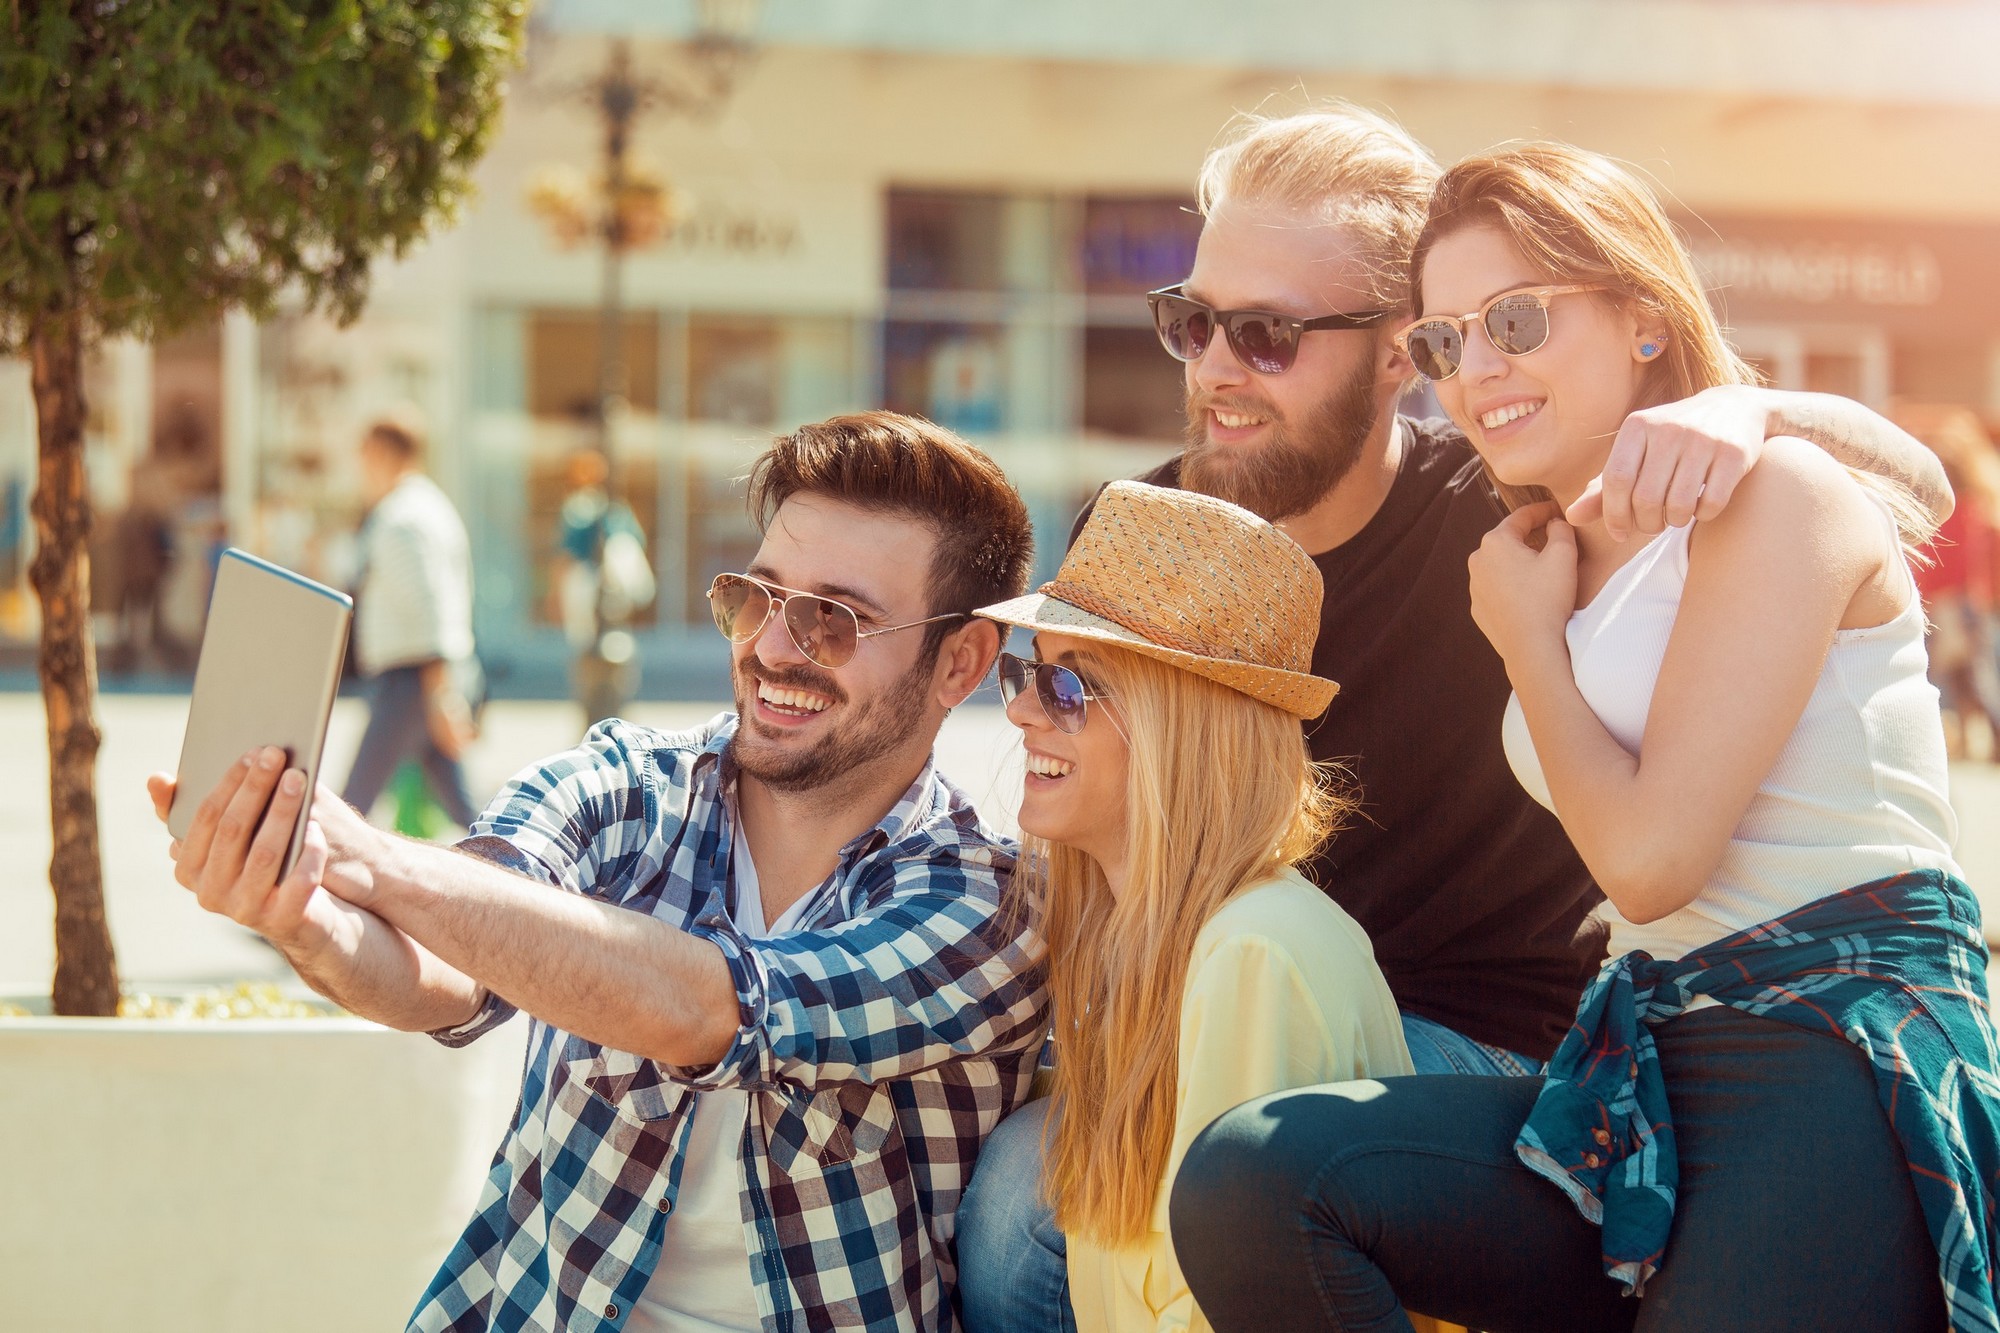 Group of friends taking a selfie with smartphone.